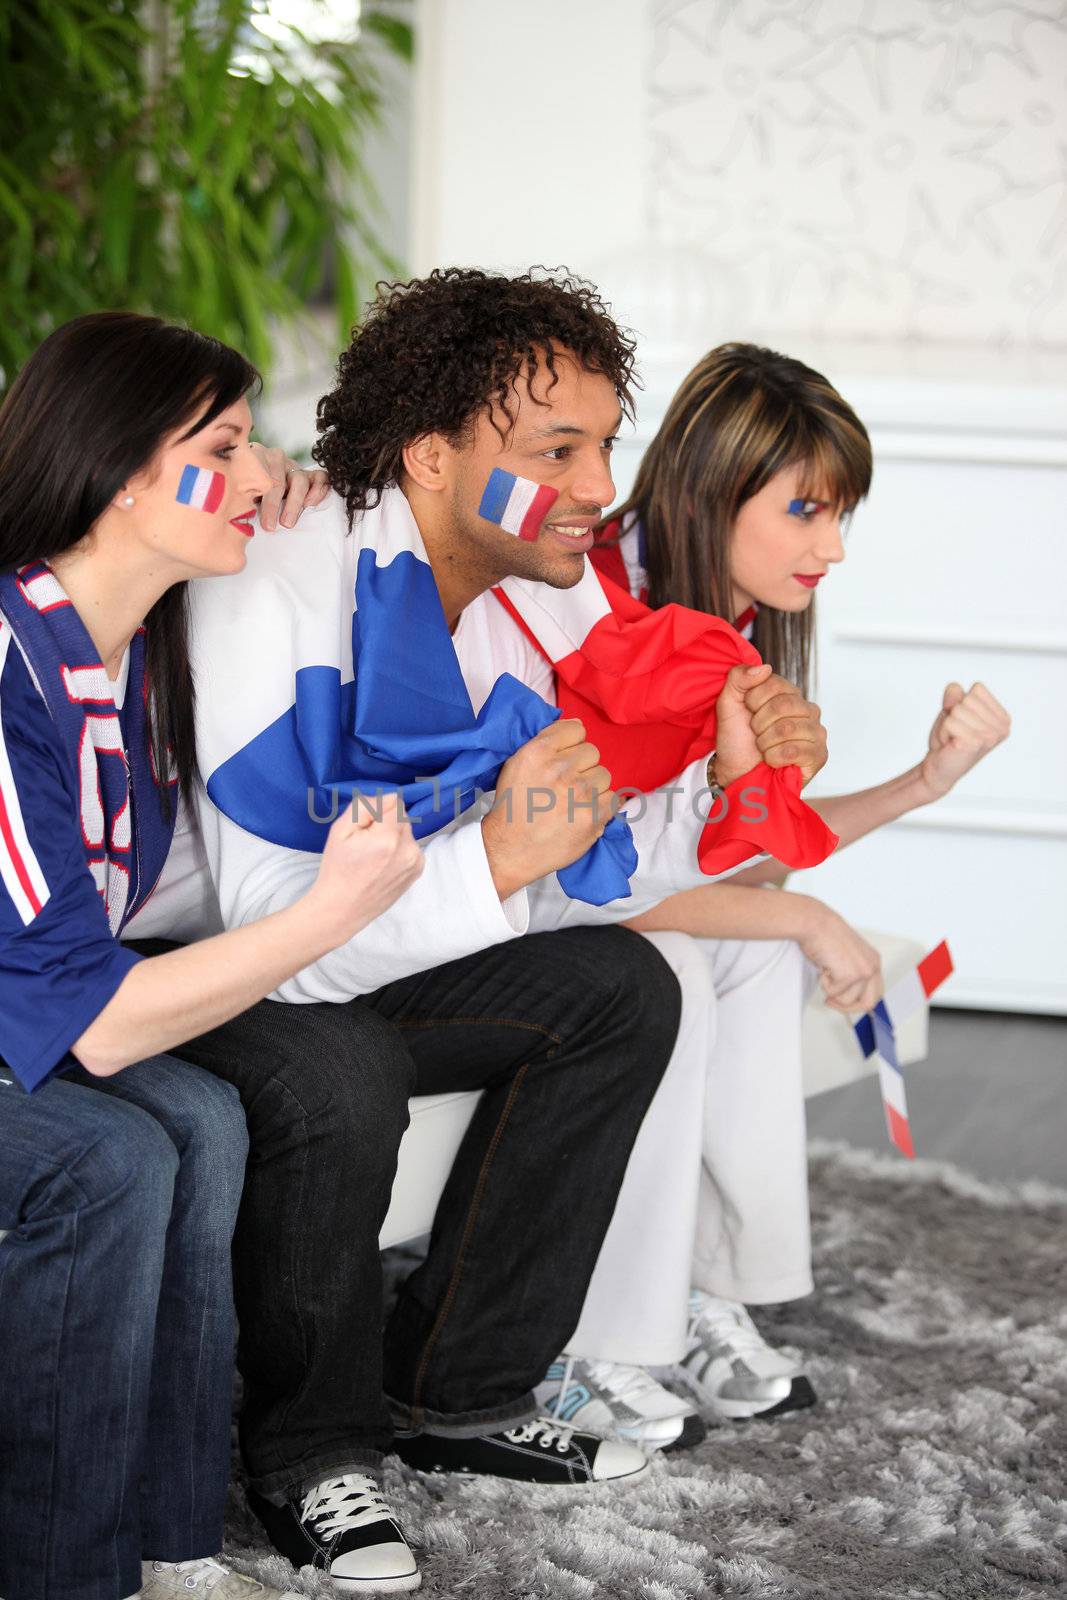 Tense French soccer supporters by phovoir